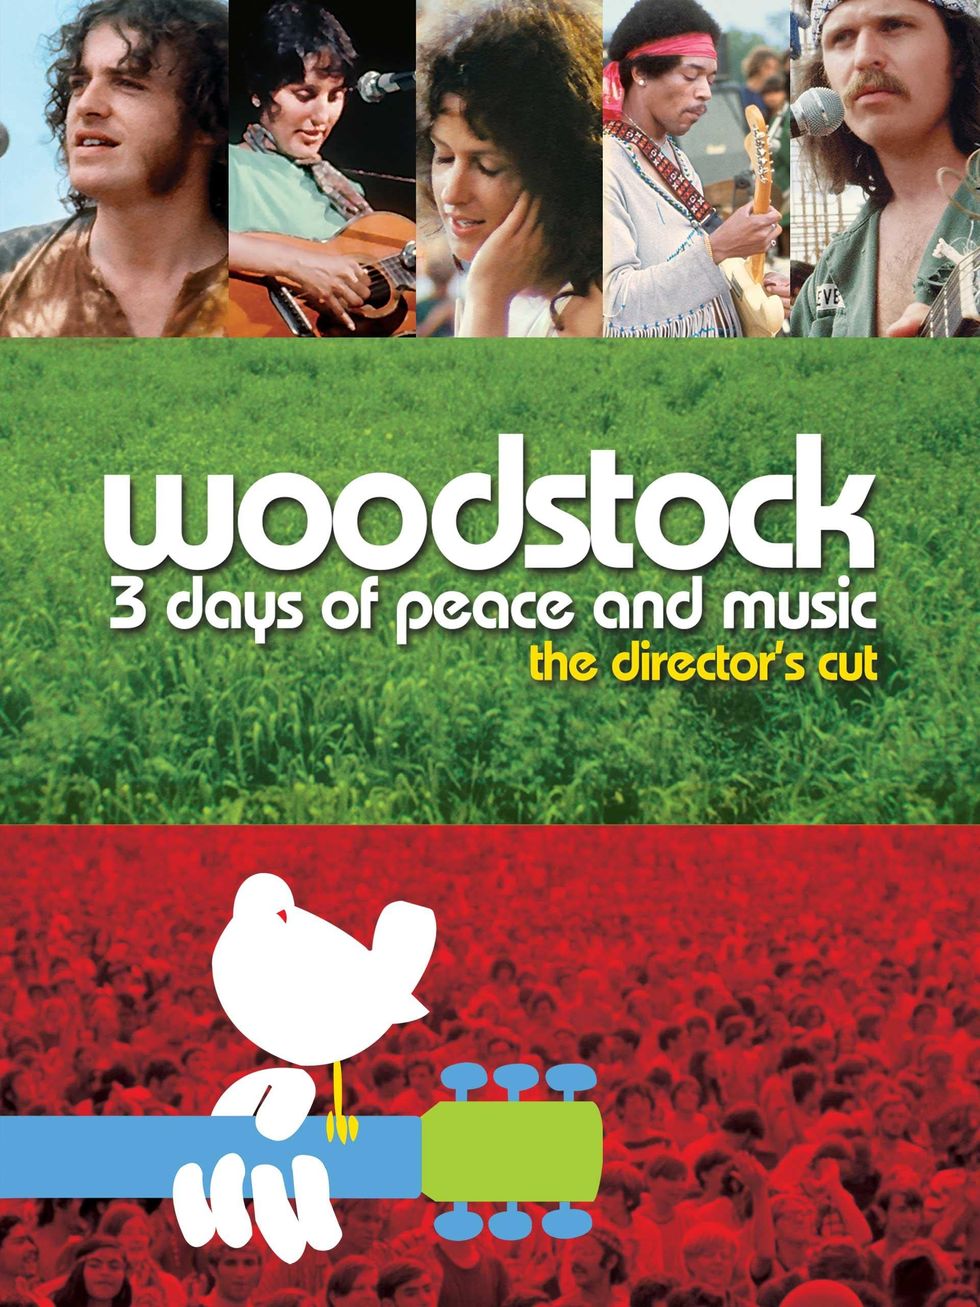 "Woodstock: 3 Days of Peace and Music, the Director's Cut"